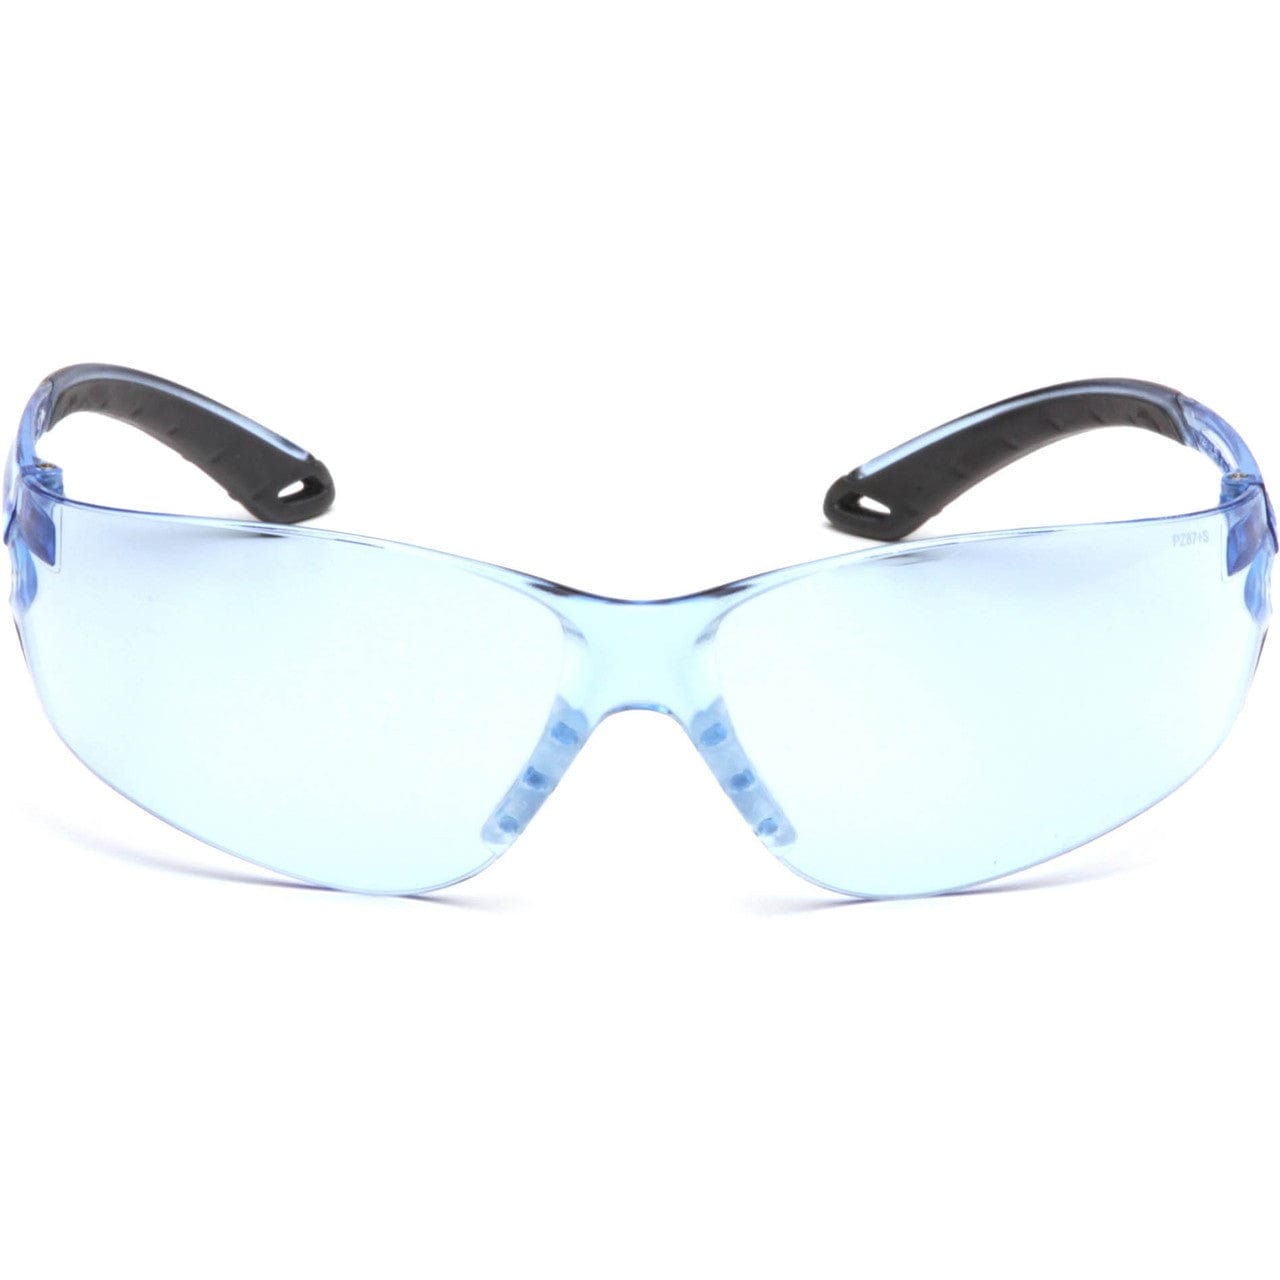 Pyramex Itek Safety Glasses with Infinity Blue Lens S5860S Front View